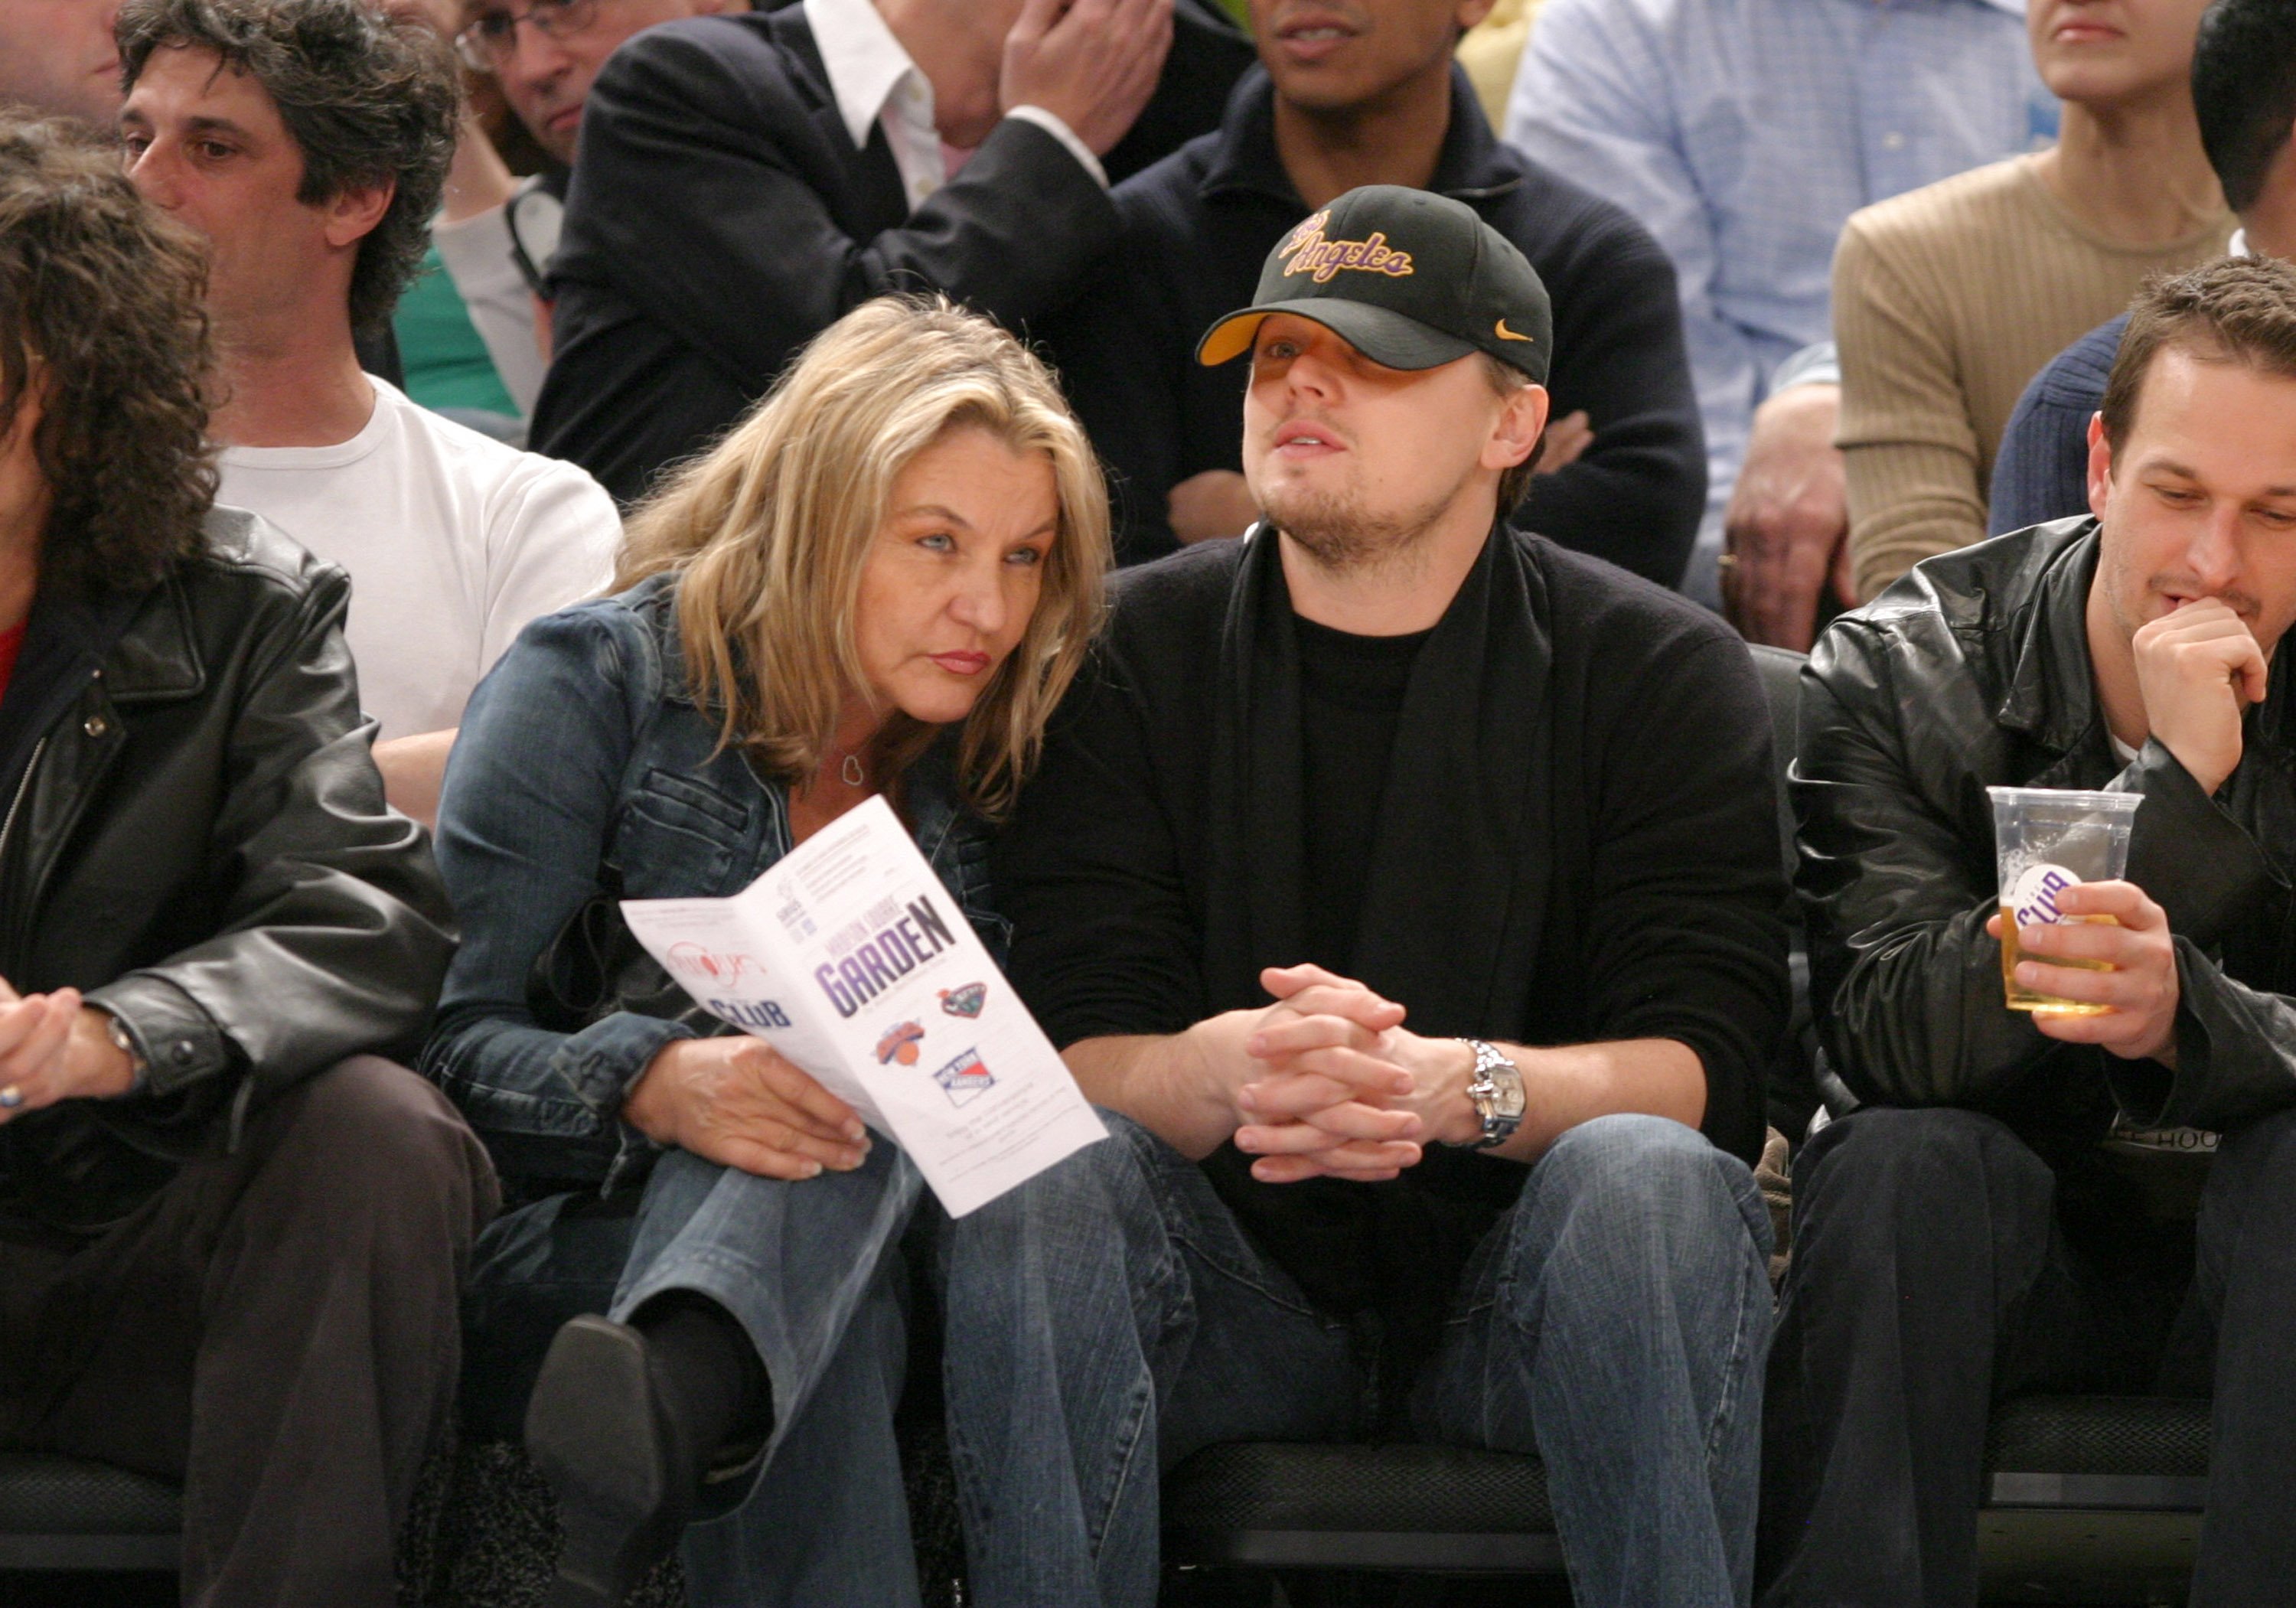 Leonardo DiCaprio with his mother at the New Jersey Nets vs. New York Knicks Game | Source: Getty Images